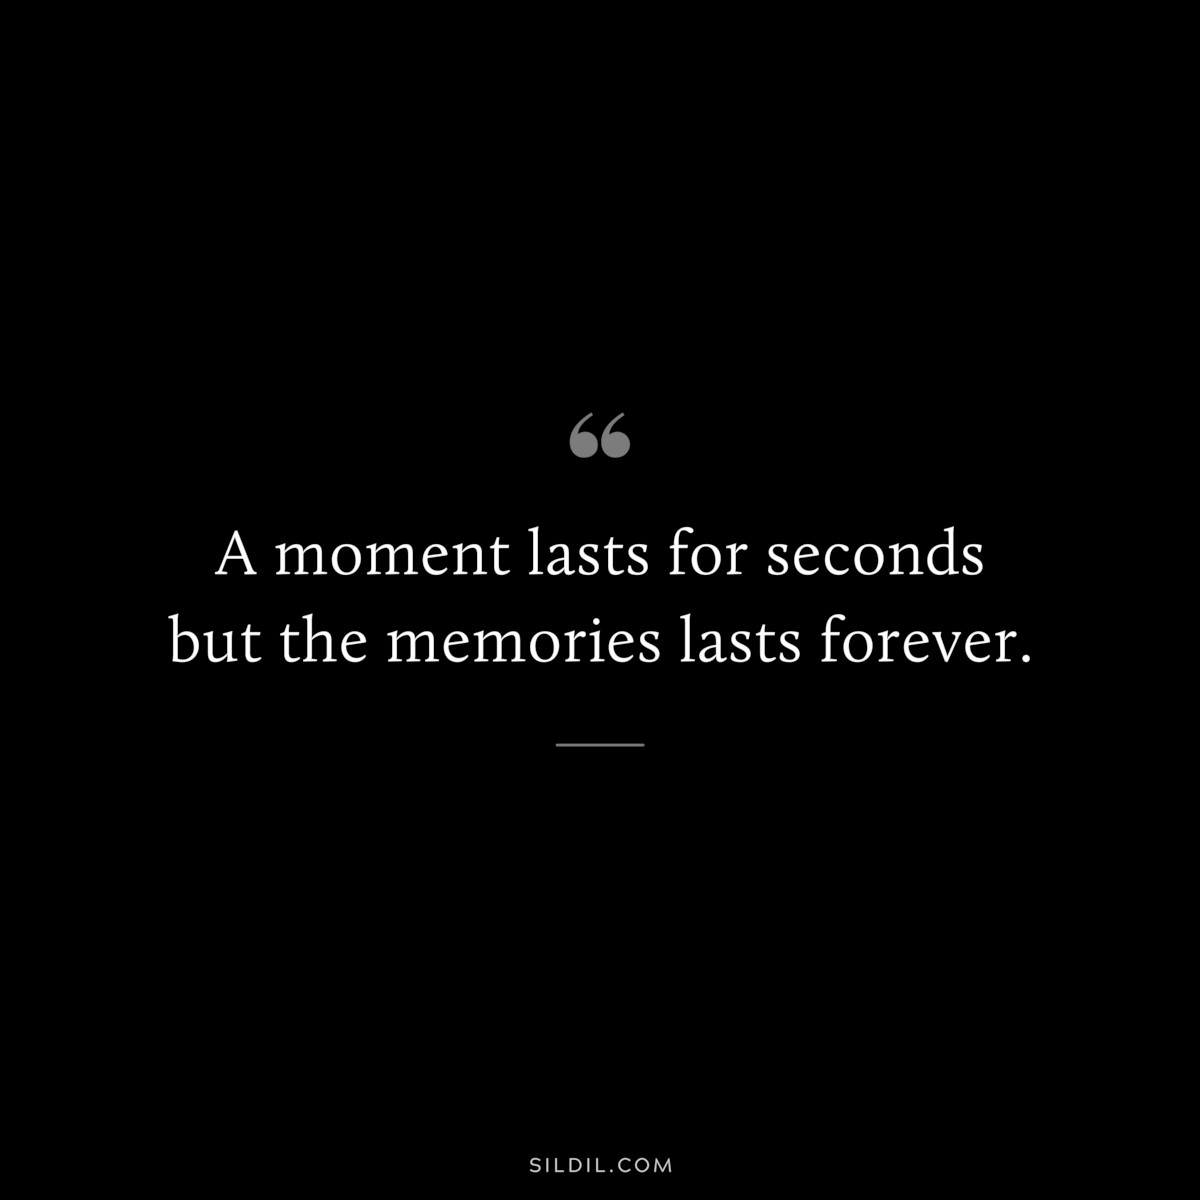 A moment lasts for seconds but the memories lasts forever.